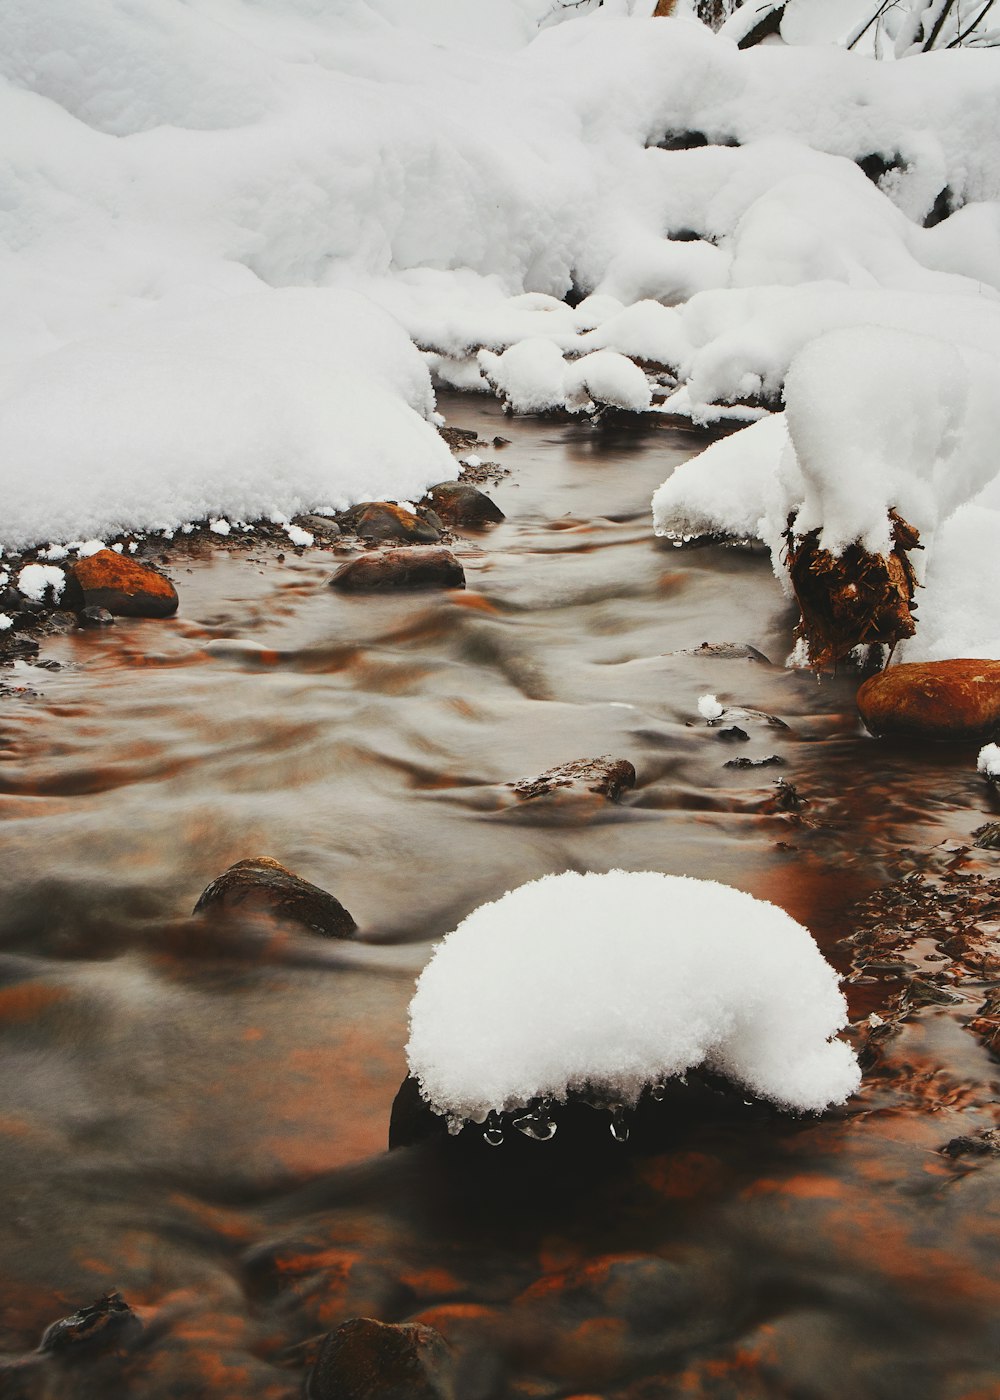 snow covered rocks on river during daytime